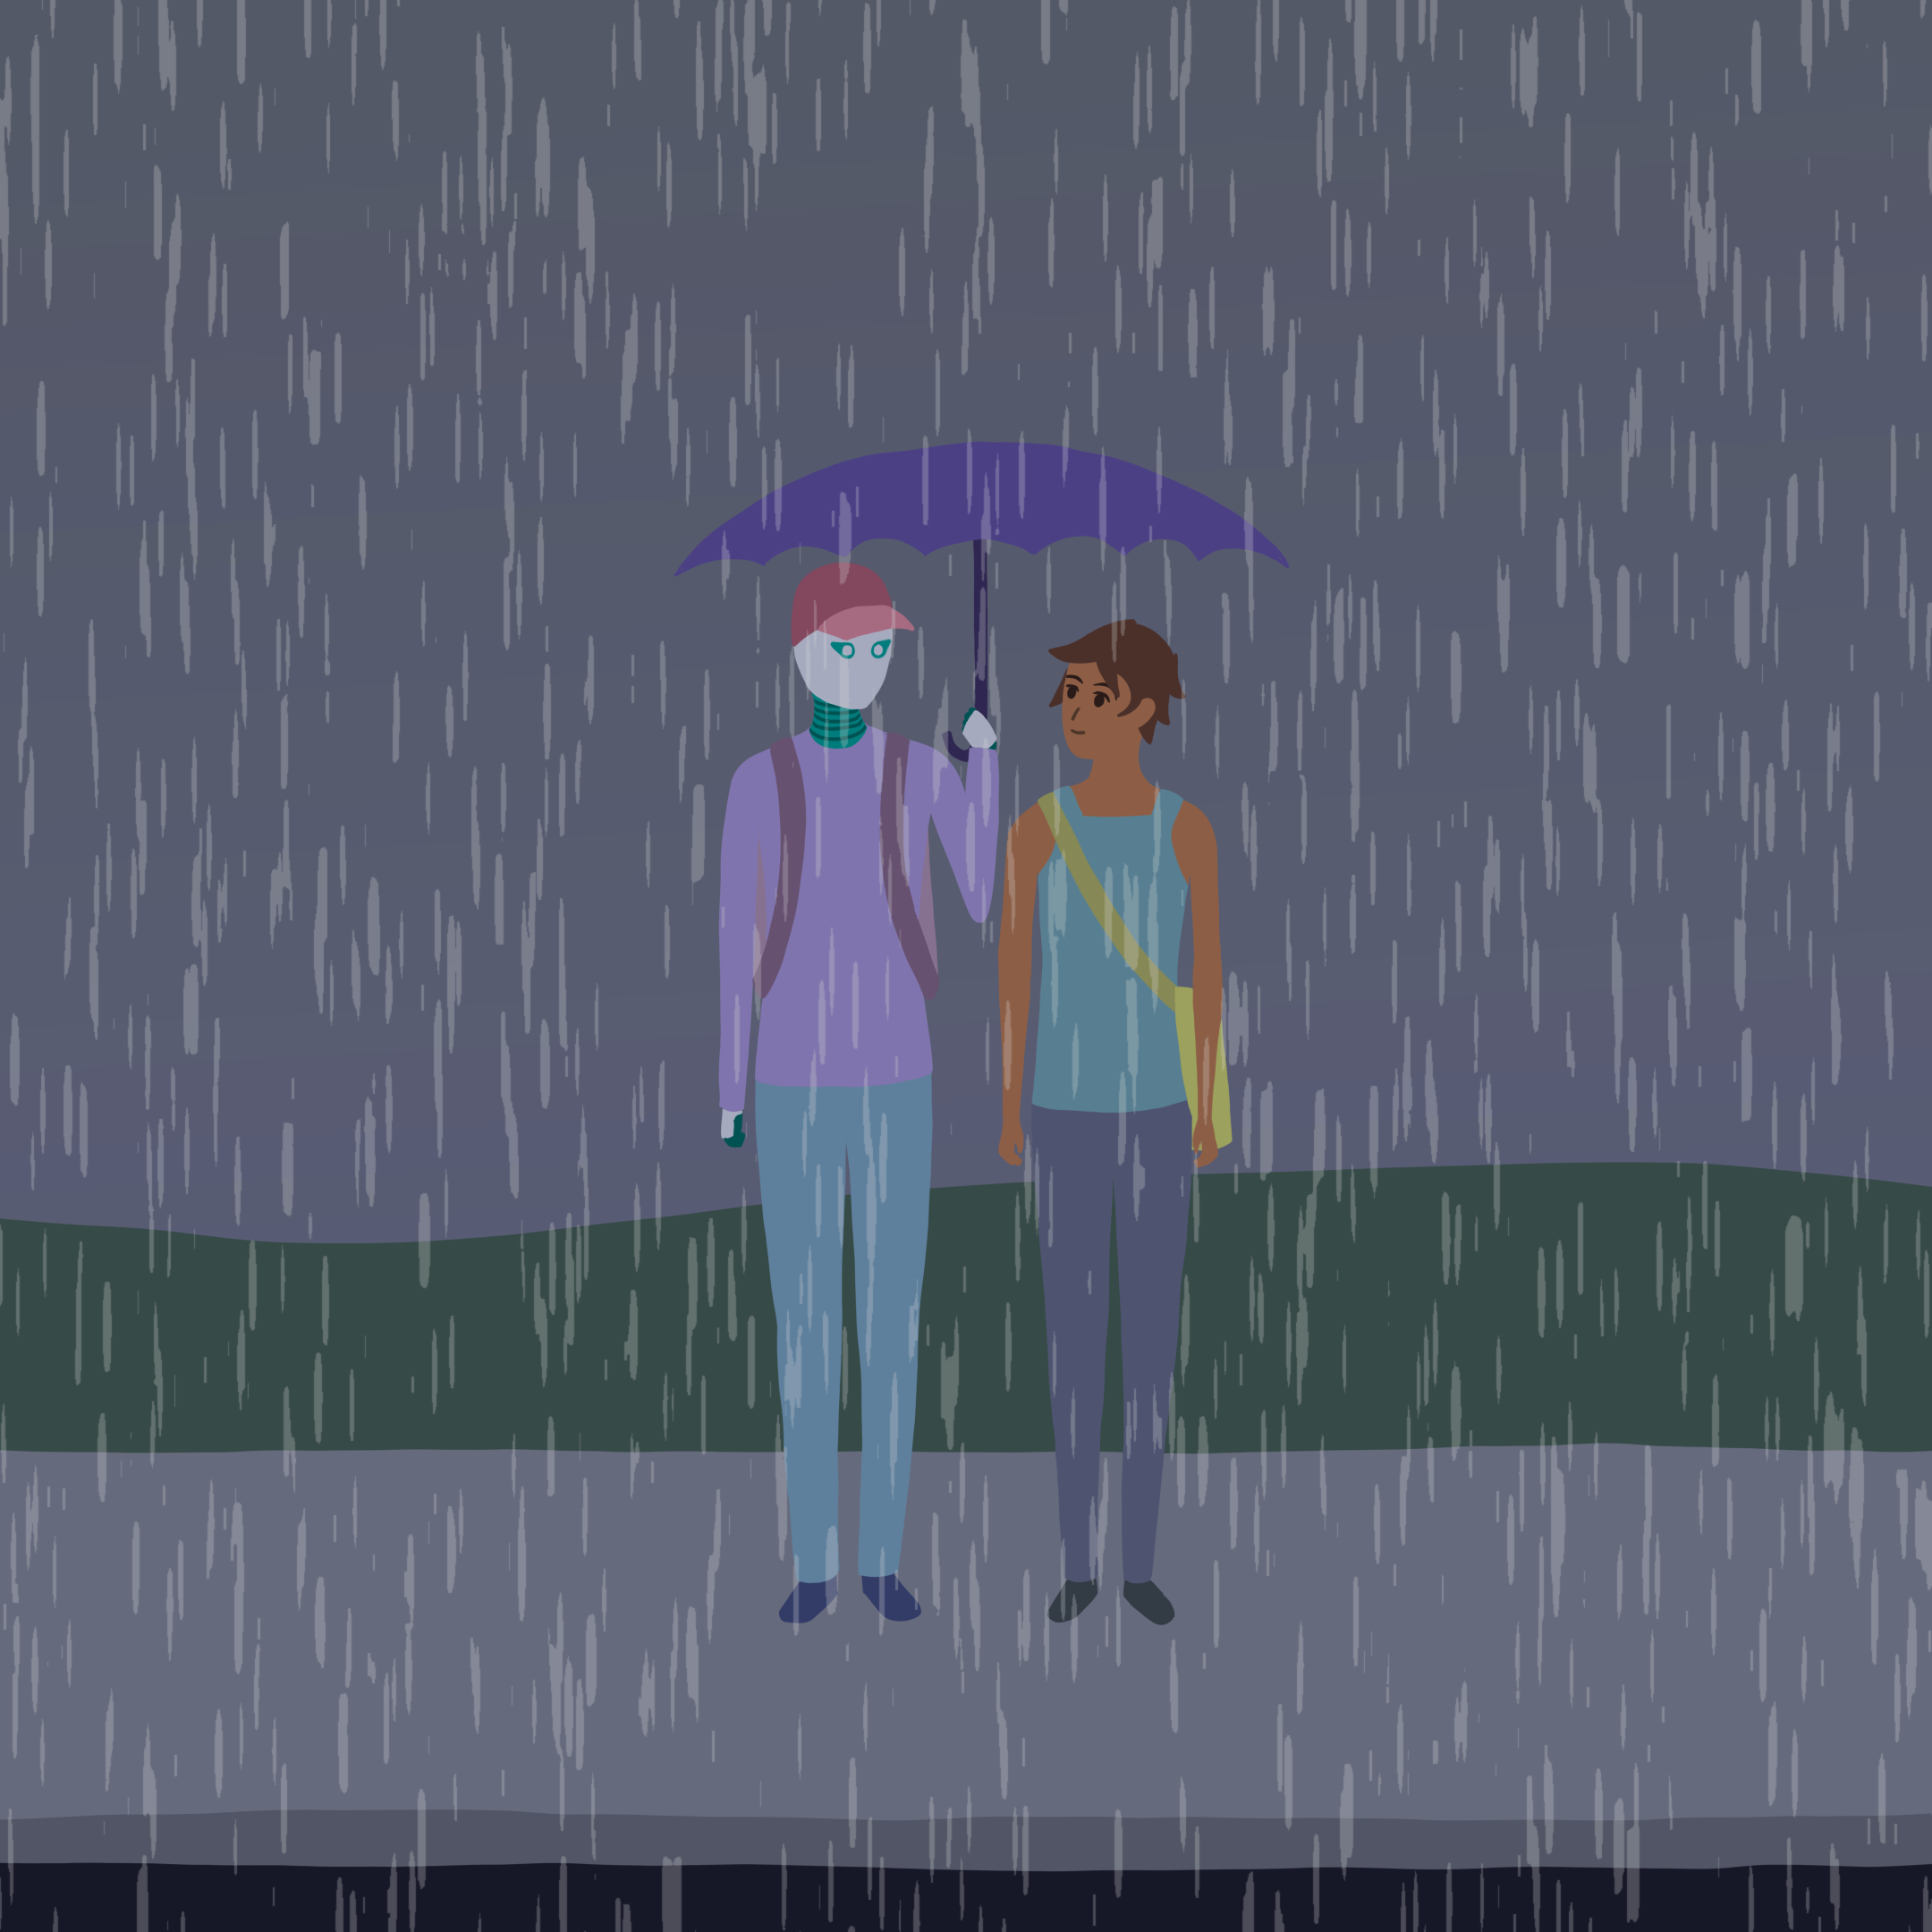 A robot named Rova and a human named Evi standing in the rain together while sharing an umbrella.